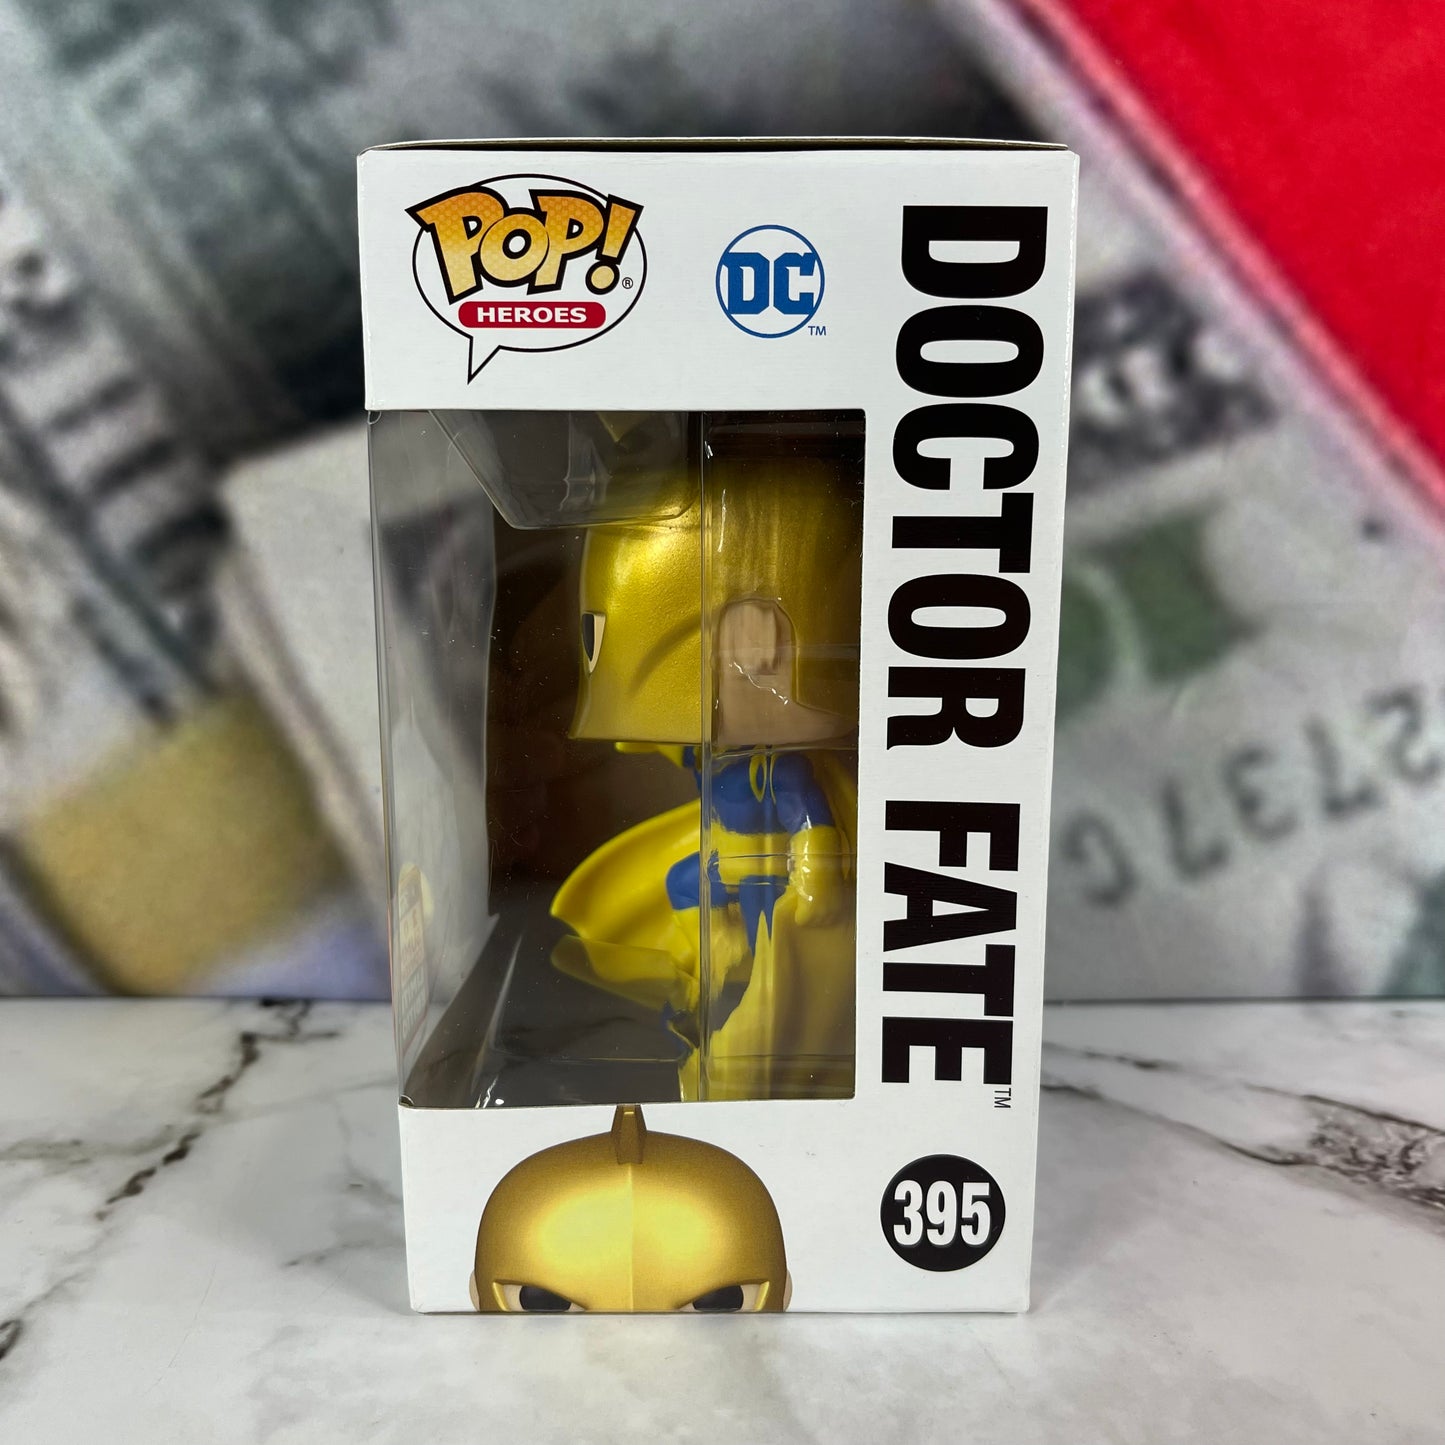 Justice League Funko Pop! Doctor Fate (2021 Summer Convention) #935